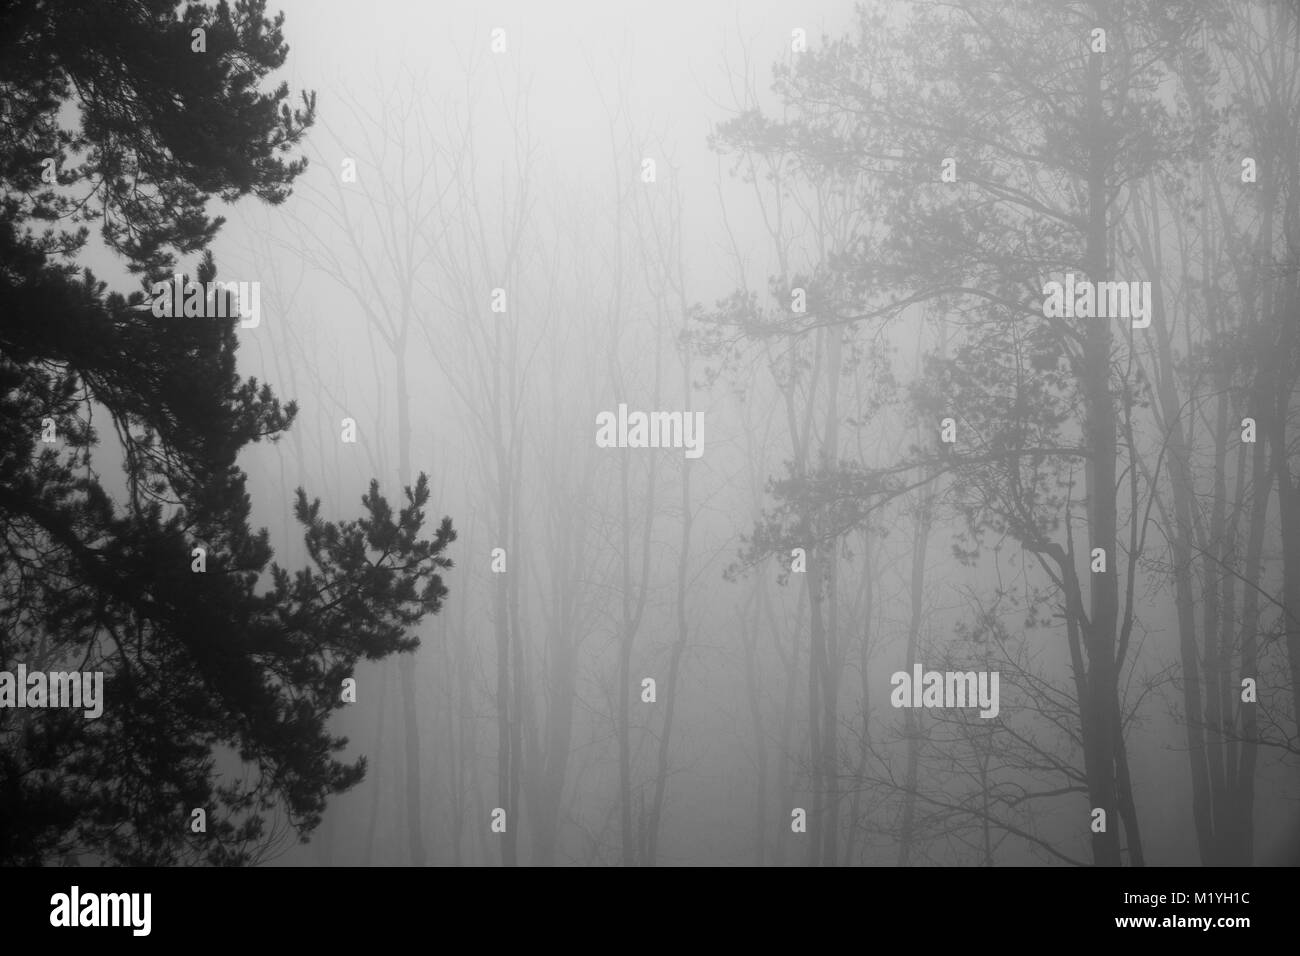 Tree silhouettes seen through thick morning fog Stock Photo